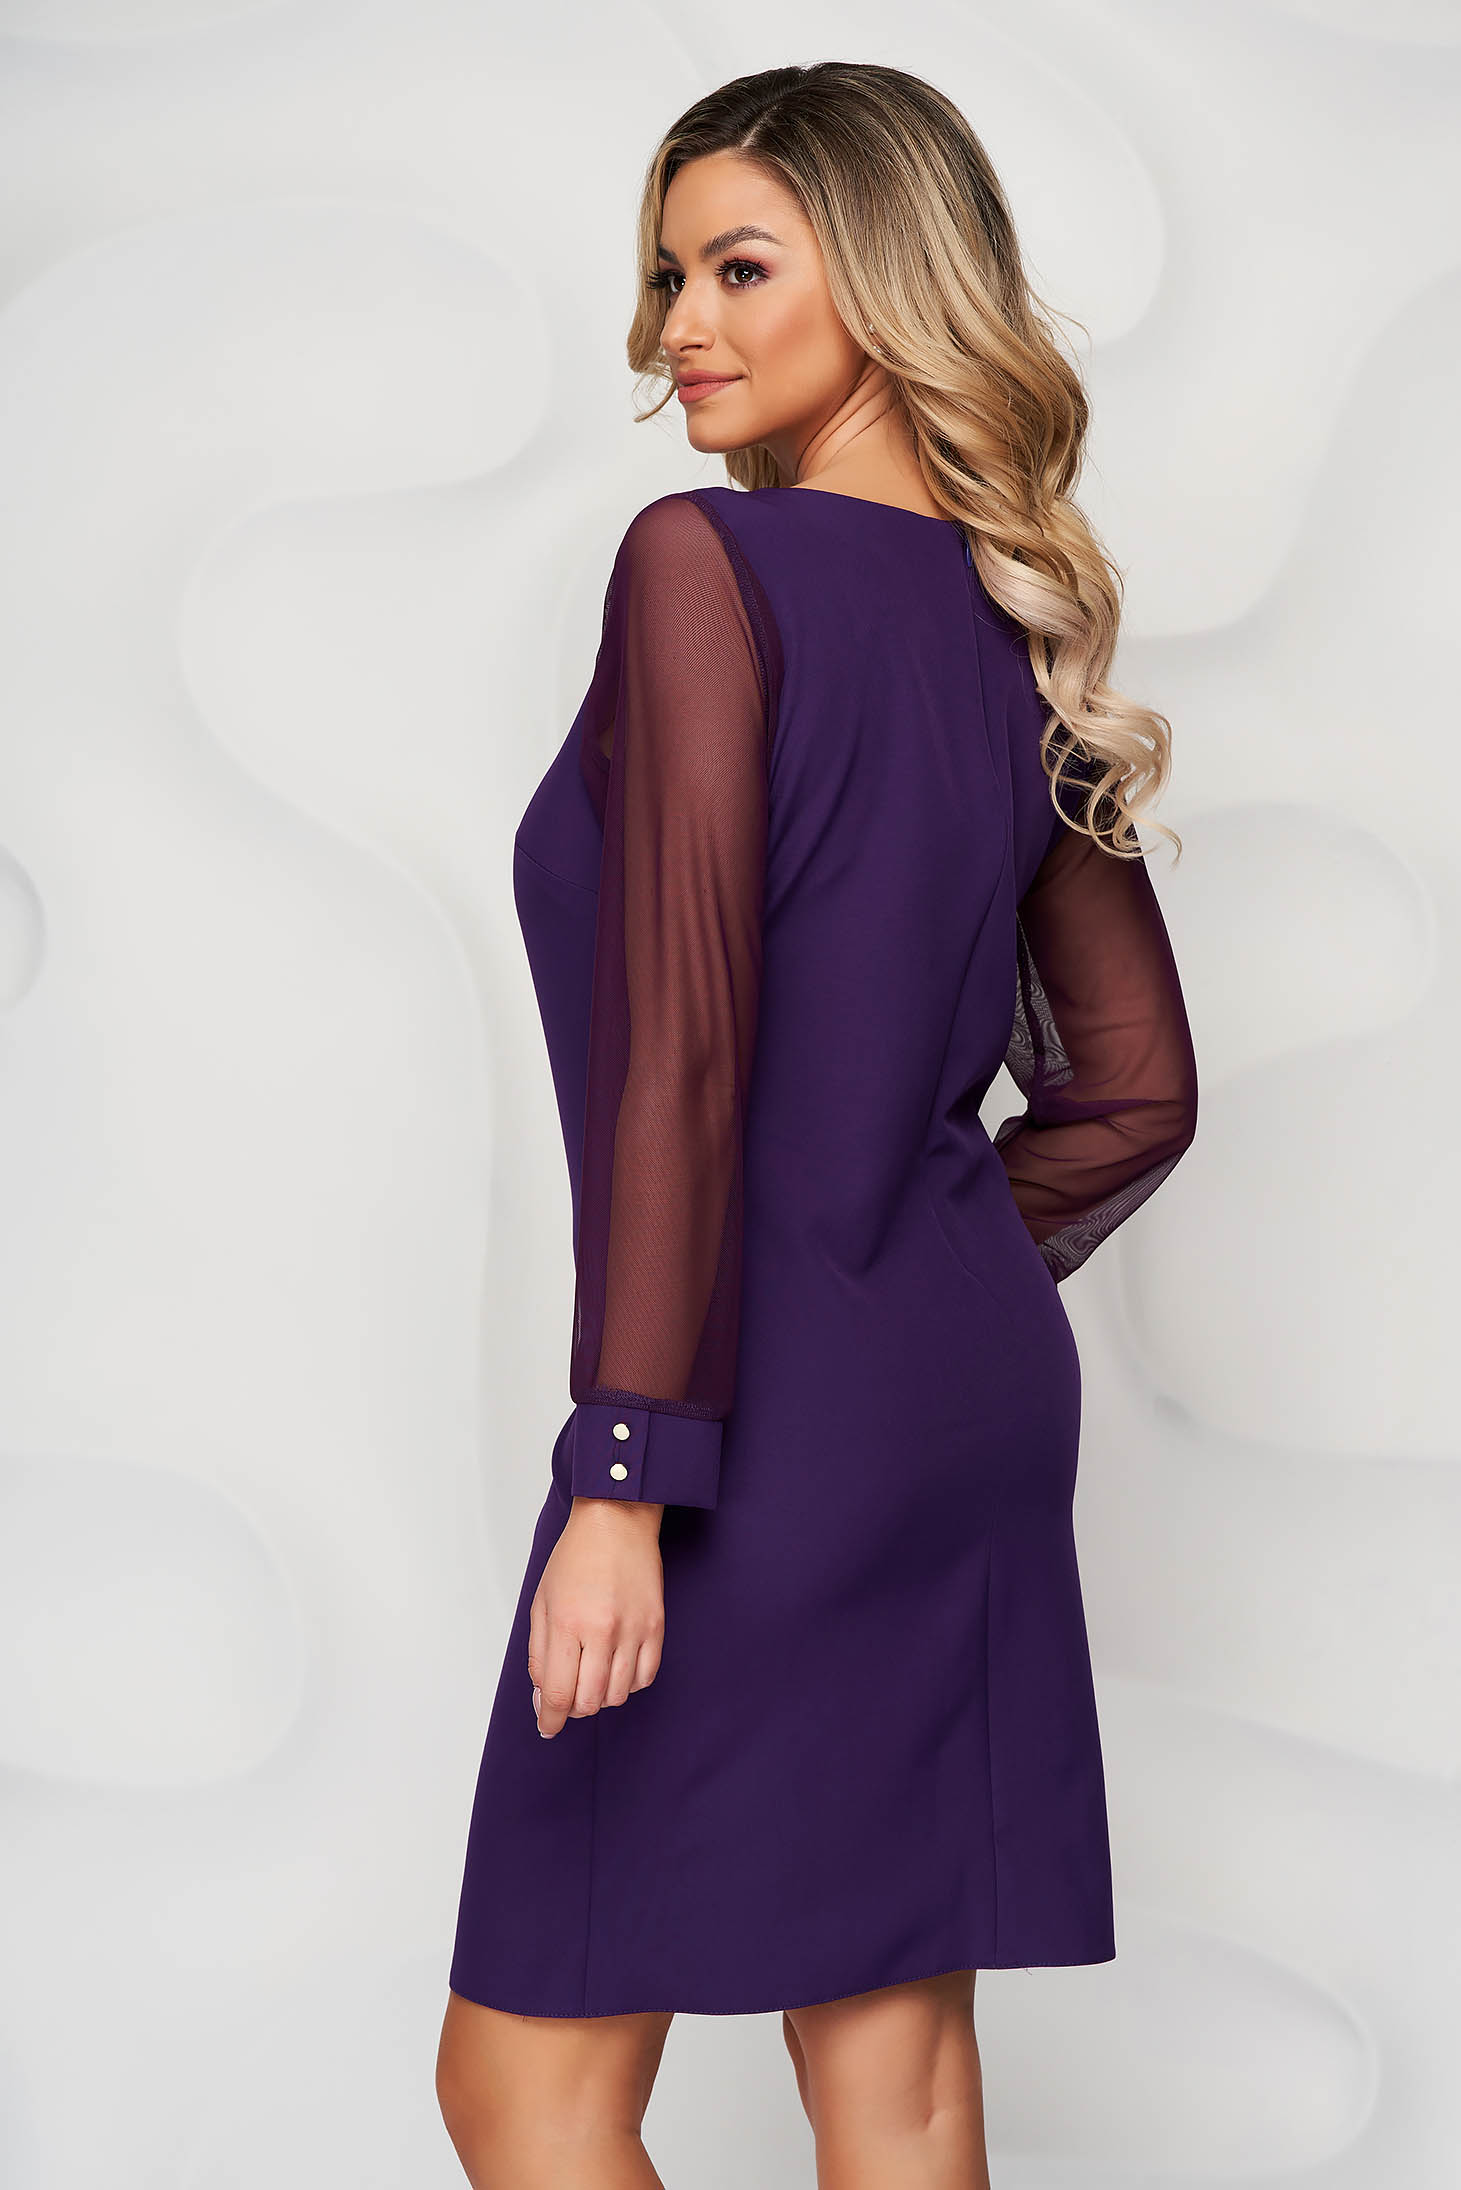 Purple dress transparent sleeves with puffed sleeves straight from ...